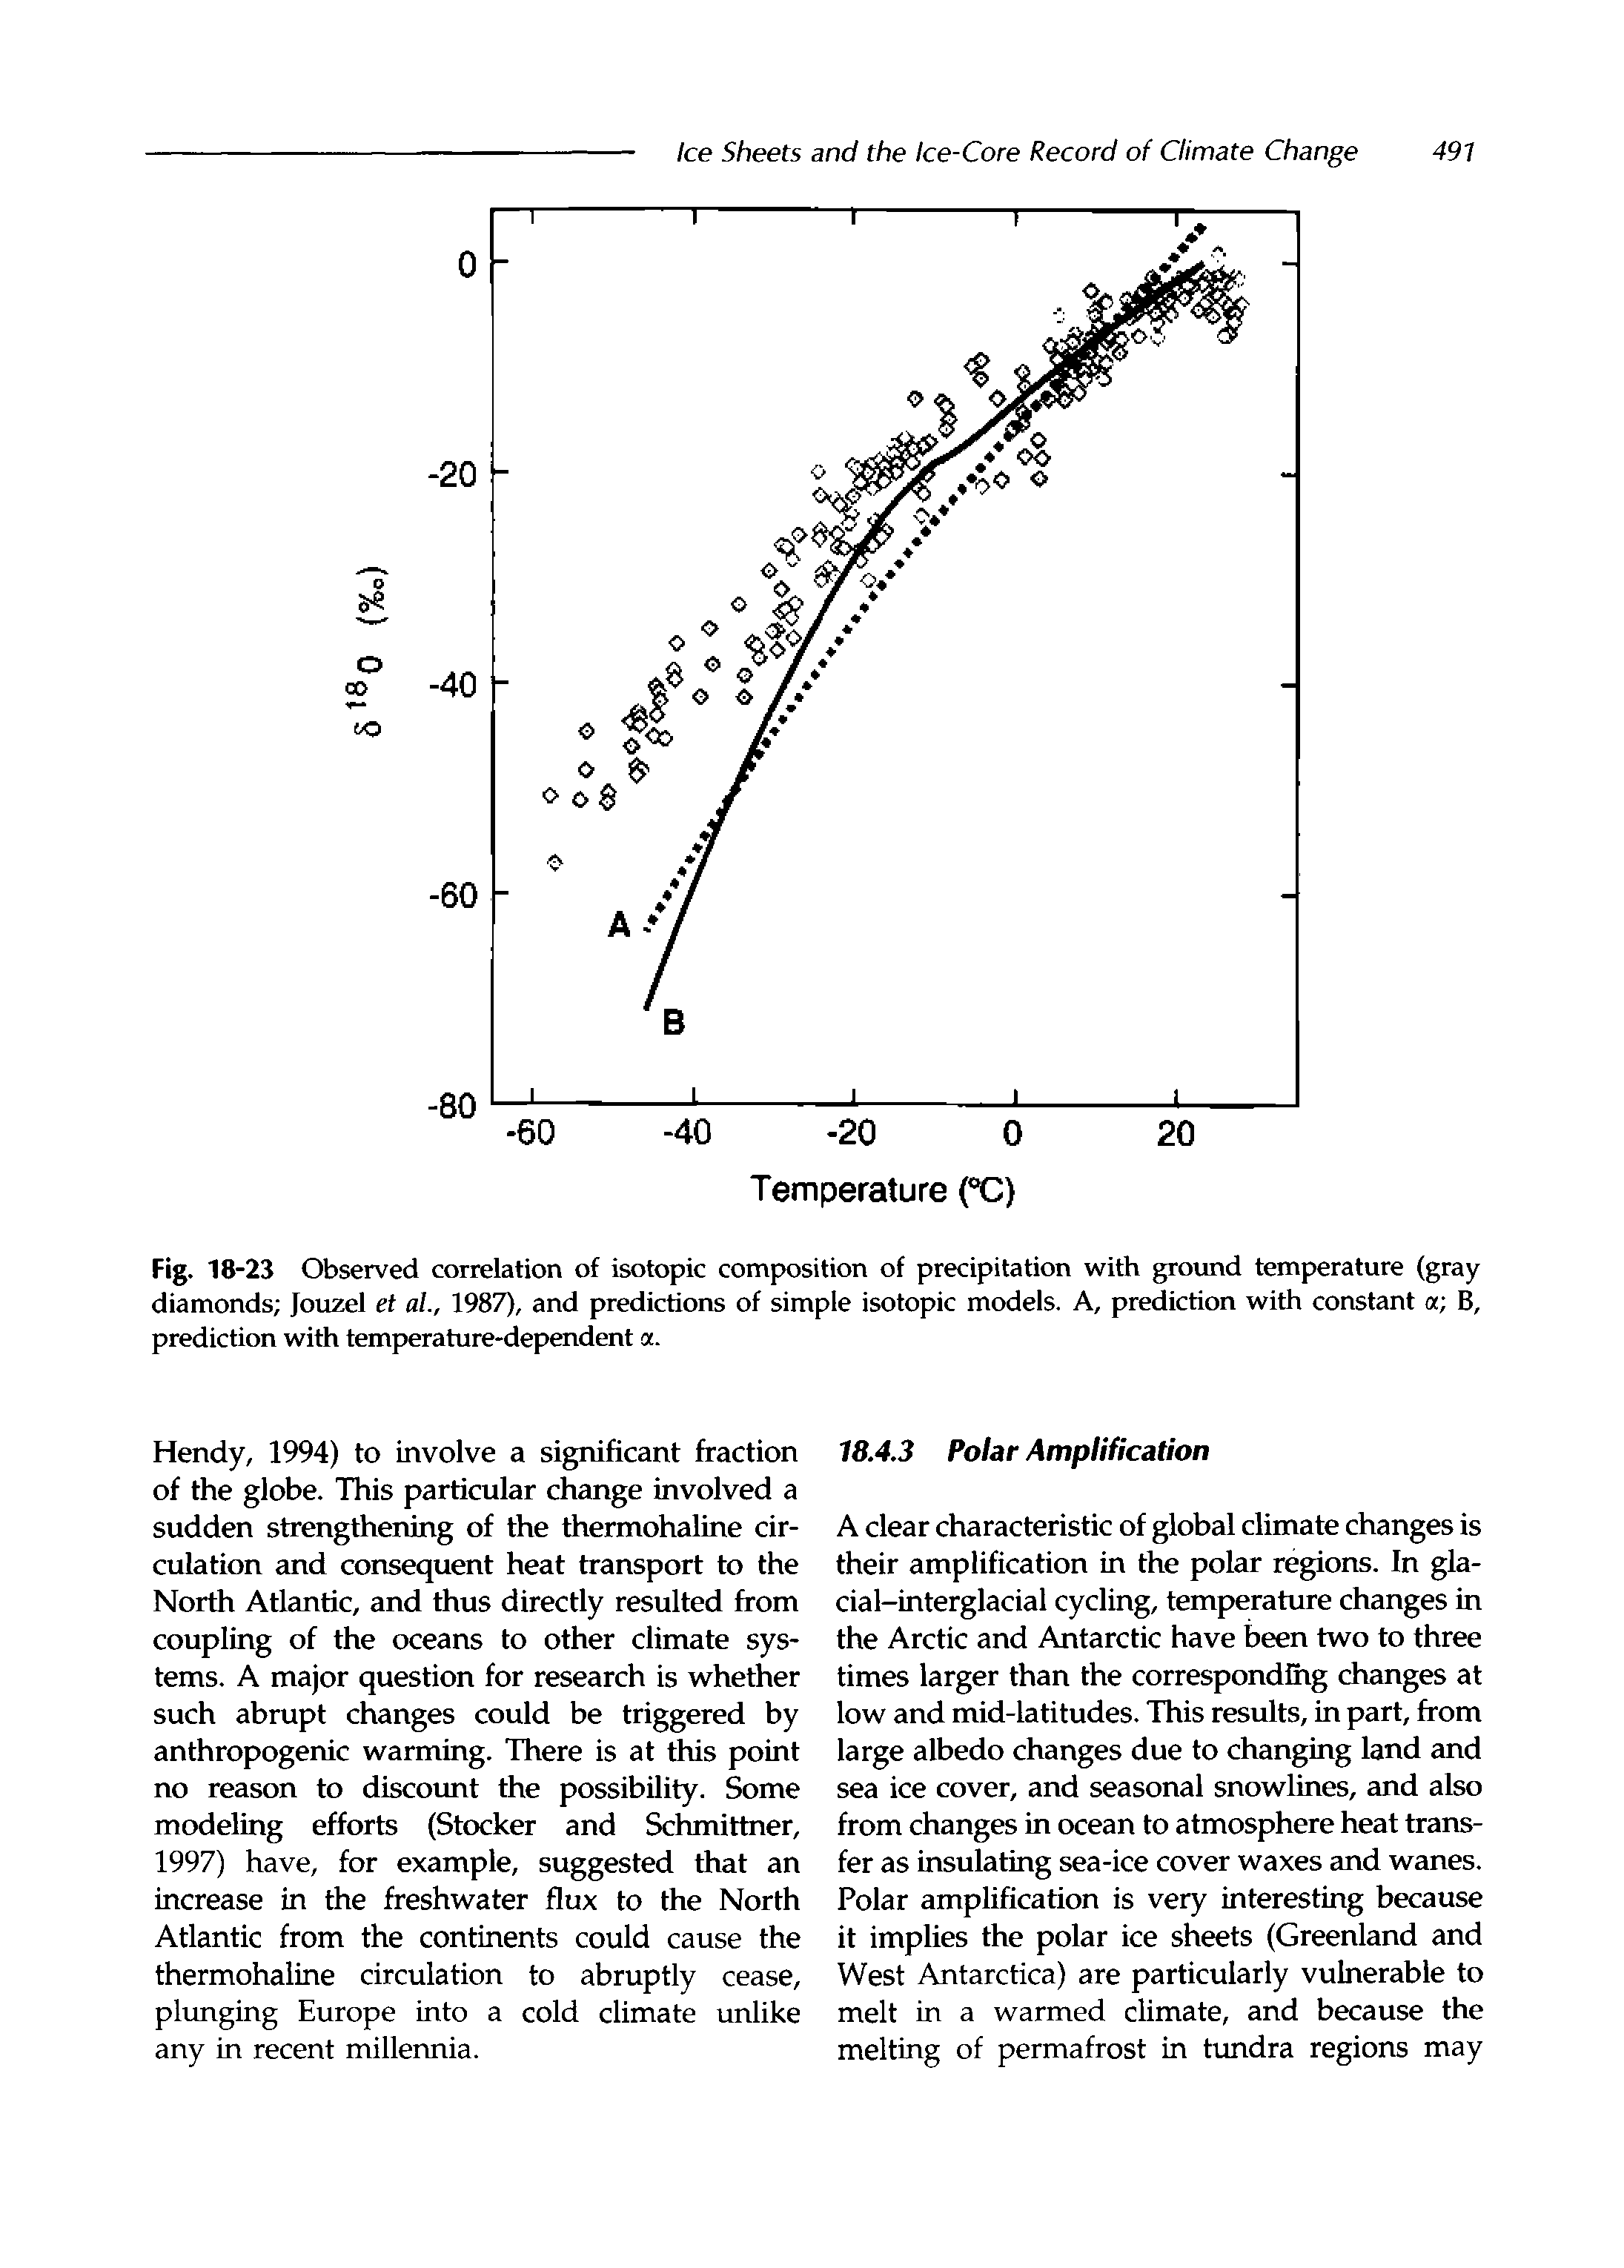 Fig. 18-23 Observed correlation of isotopic composition of precipitation with ground temperature (gray diamonds Jouzel et ah, 1987), and predictions of simple isotopic models. A, prediction with constant a B, prediction with temperature-dependent a.